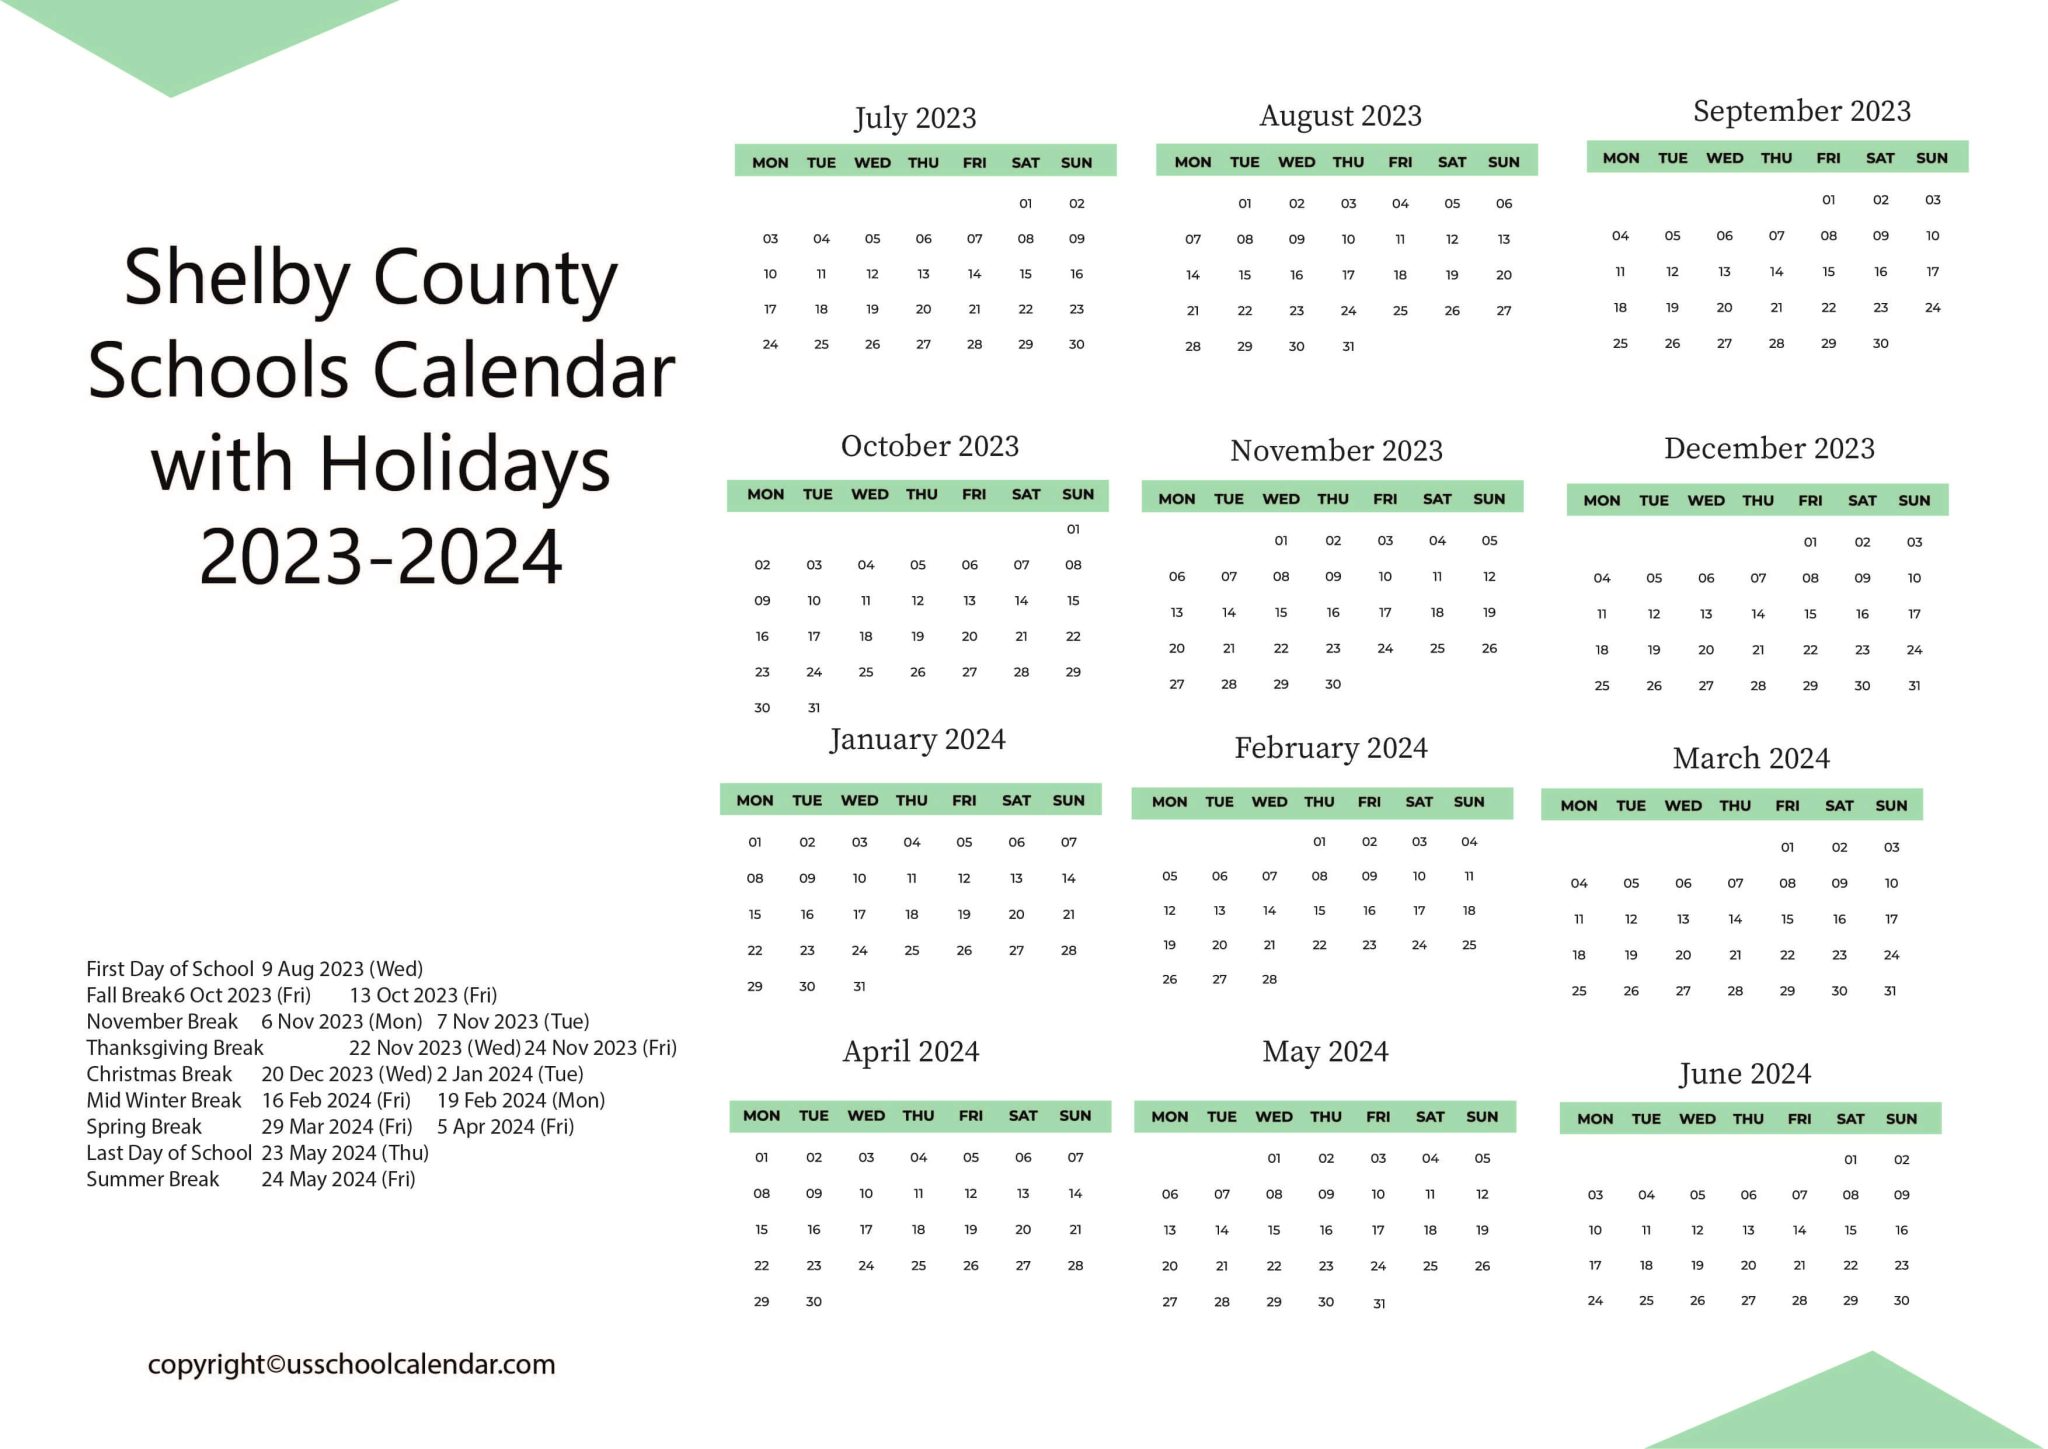 Shelby County Schools Calendar with Holidays 2023-2024